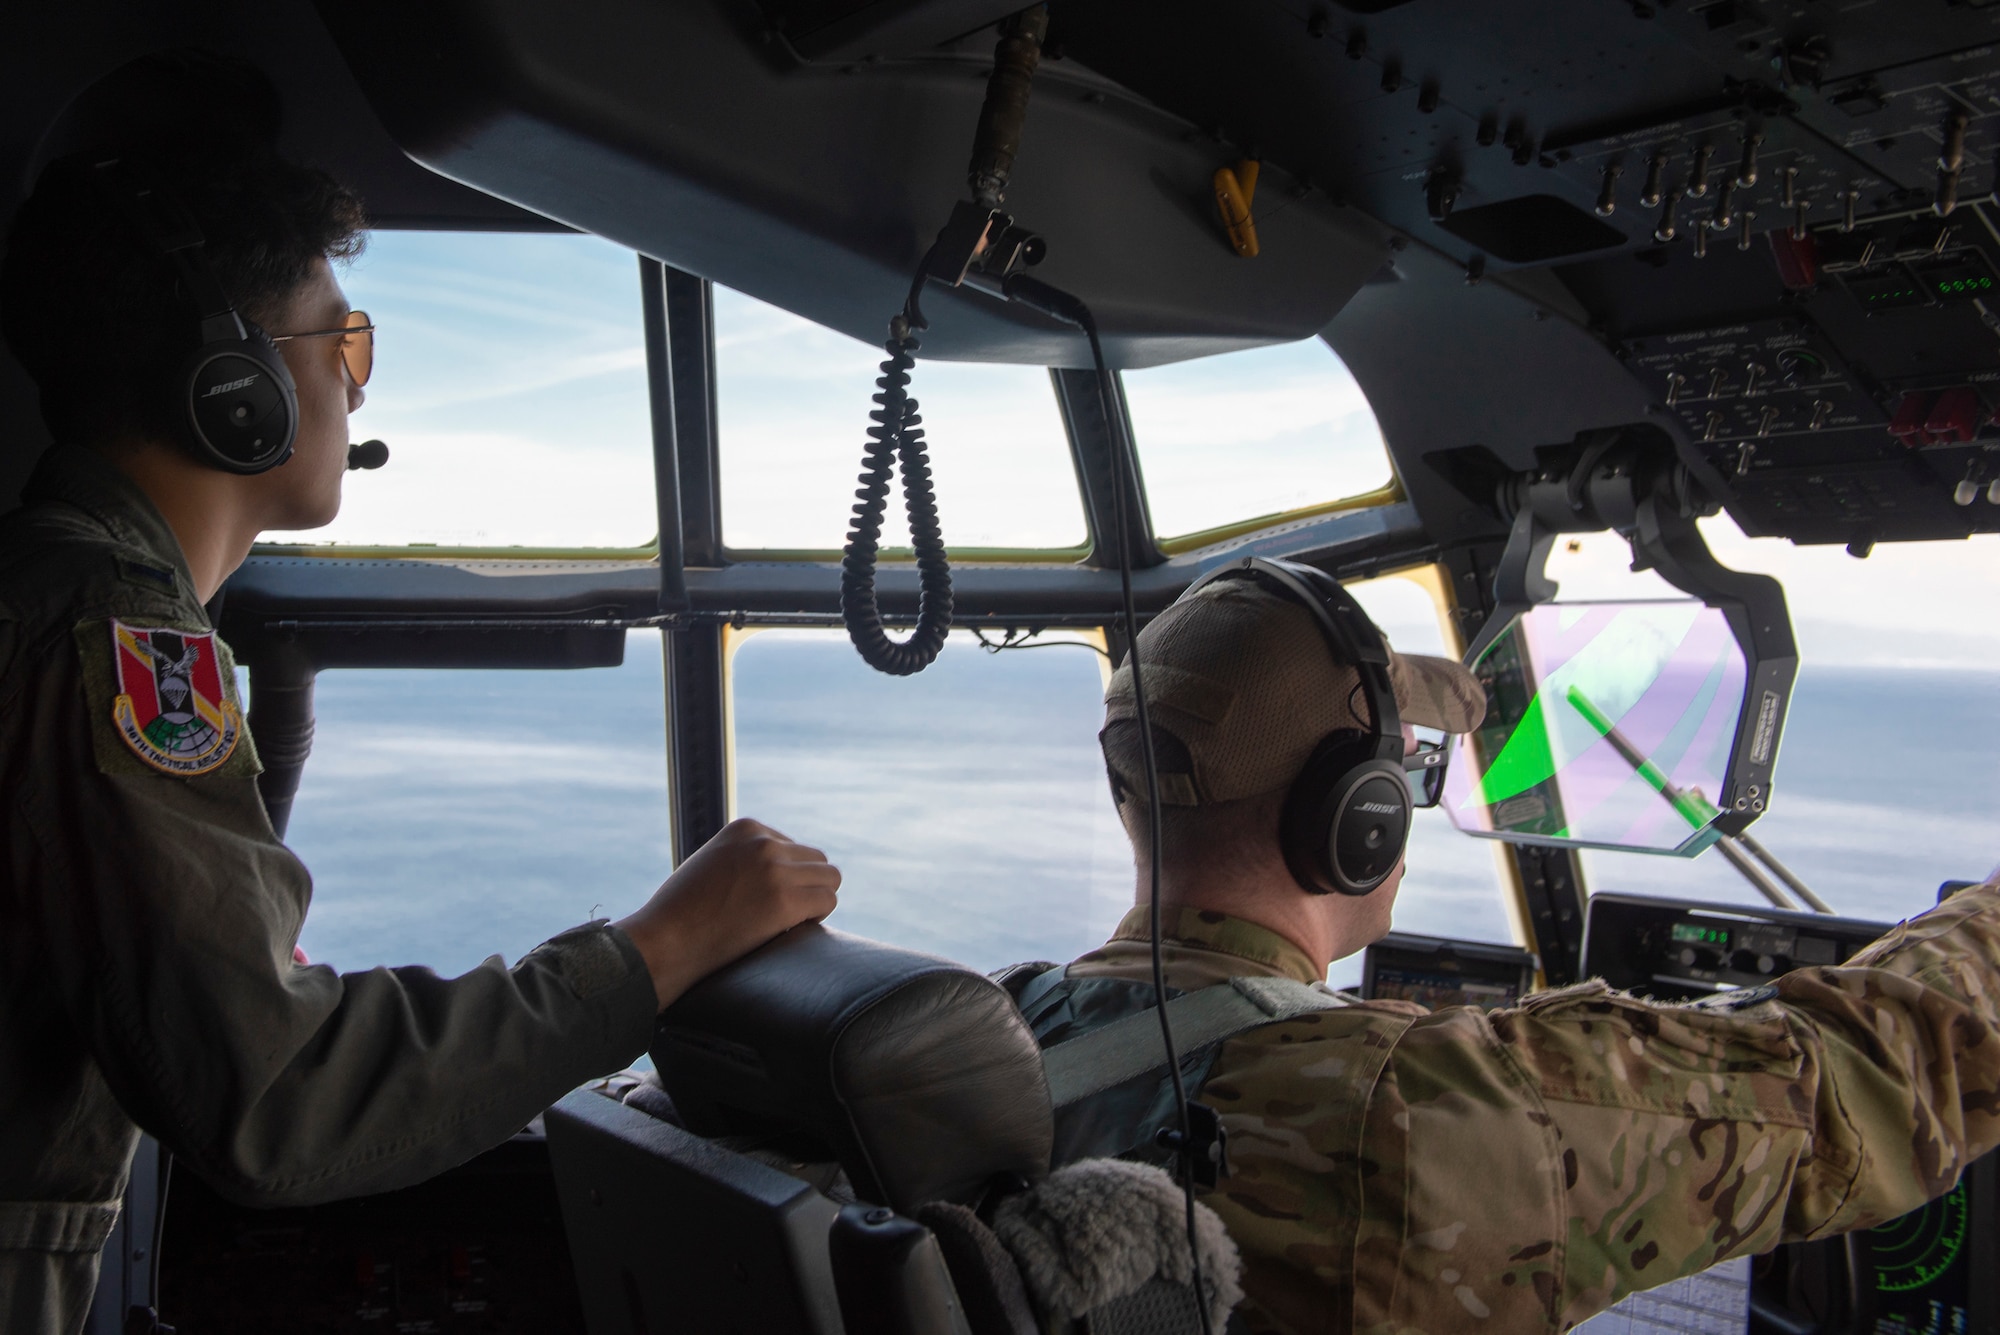 Capt. Sean Boyington, 36th Airlift Squadron C-130J Super Hercules instructor pilot, talks to Joey DeGrella, Pilot for a Day participant, while operating a C-130J Super Hercules flight over the Pacific Ocean of the eastern coast of Japan, Sept. 20, 2019.